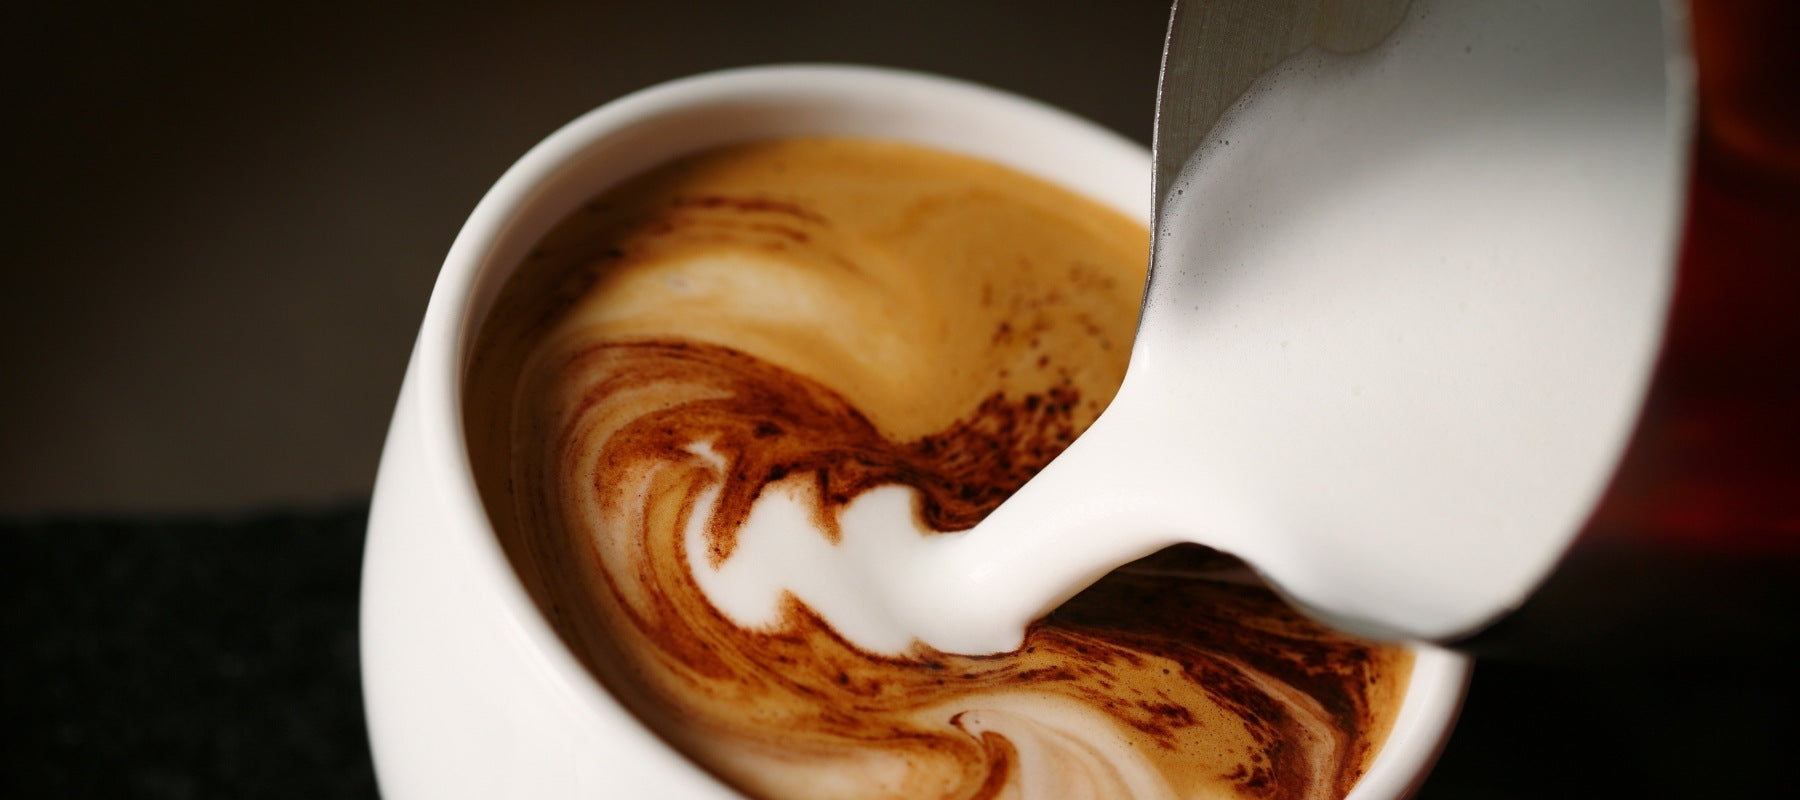 Milk being poured into a mocha or latte drink